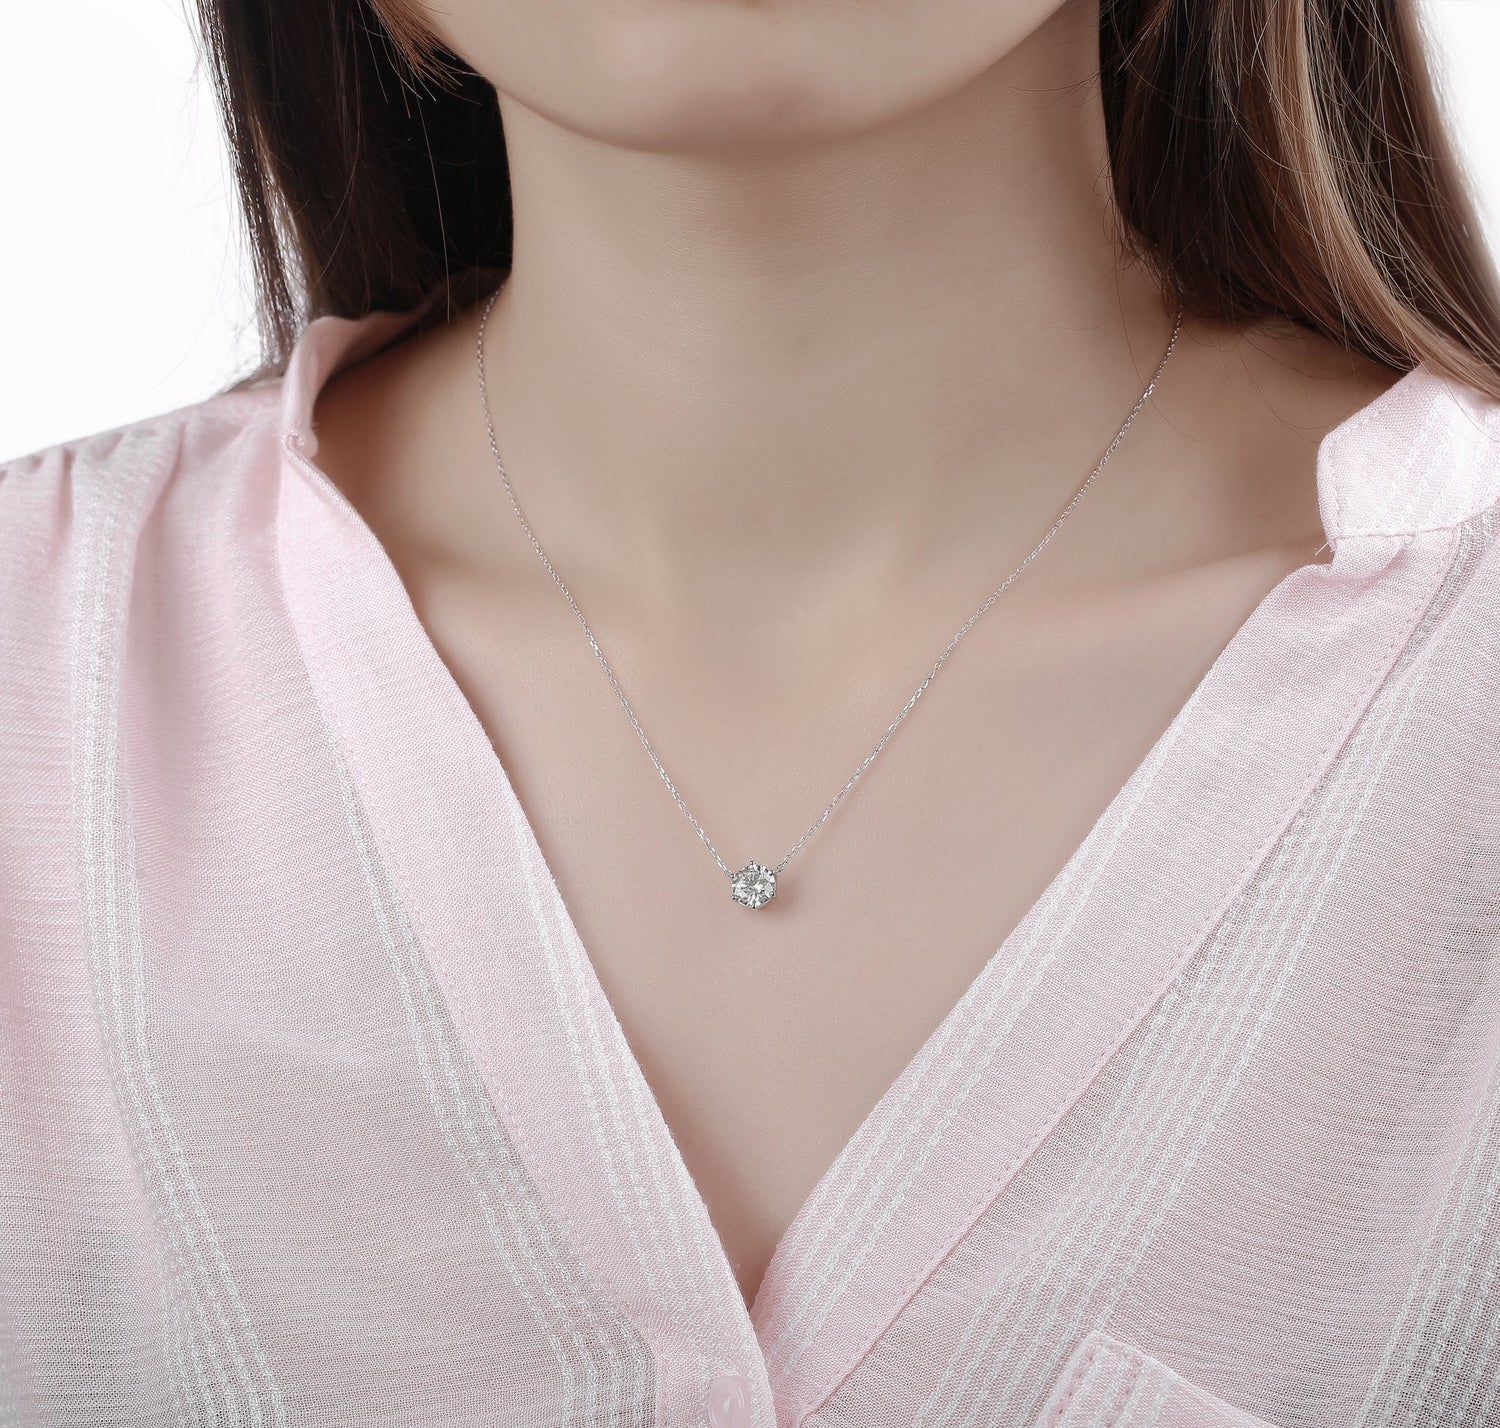 Solitaire necklace with a 1.50 carat diamond in white gold - BAUNAT